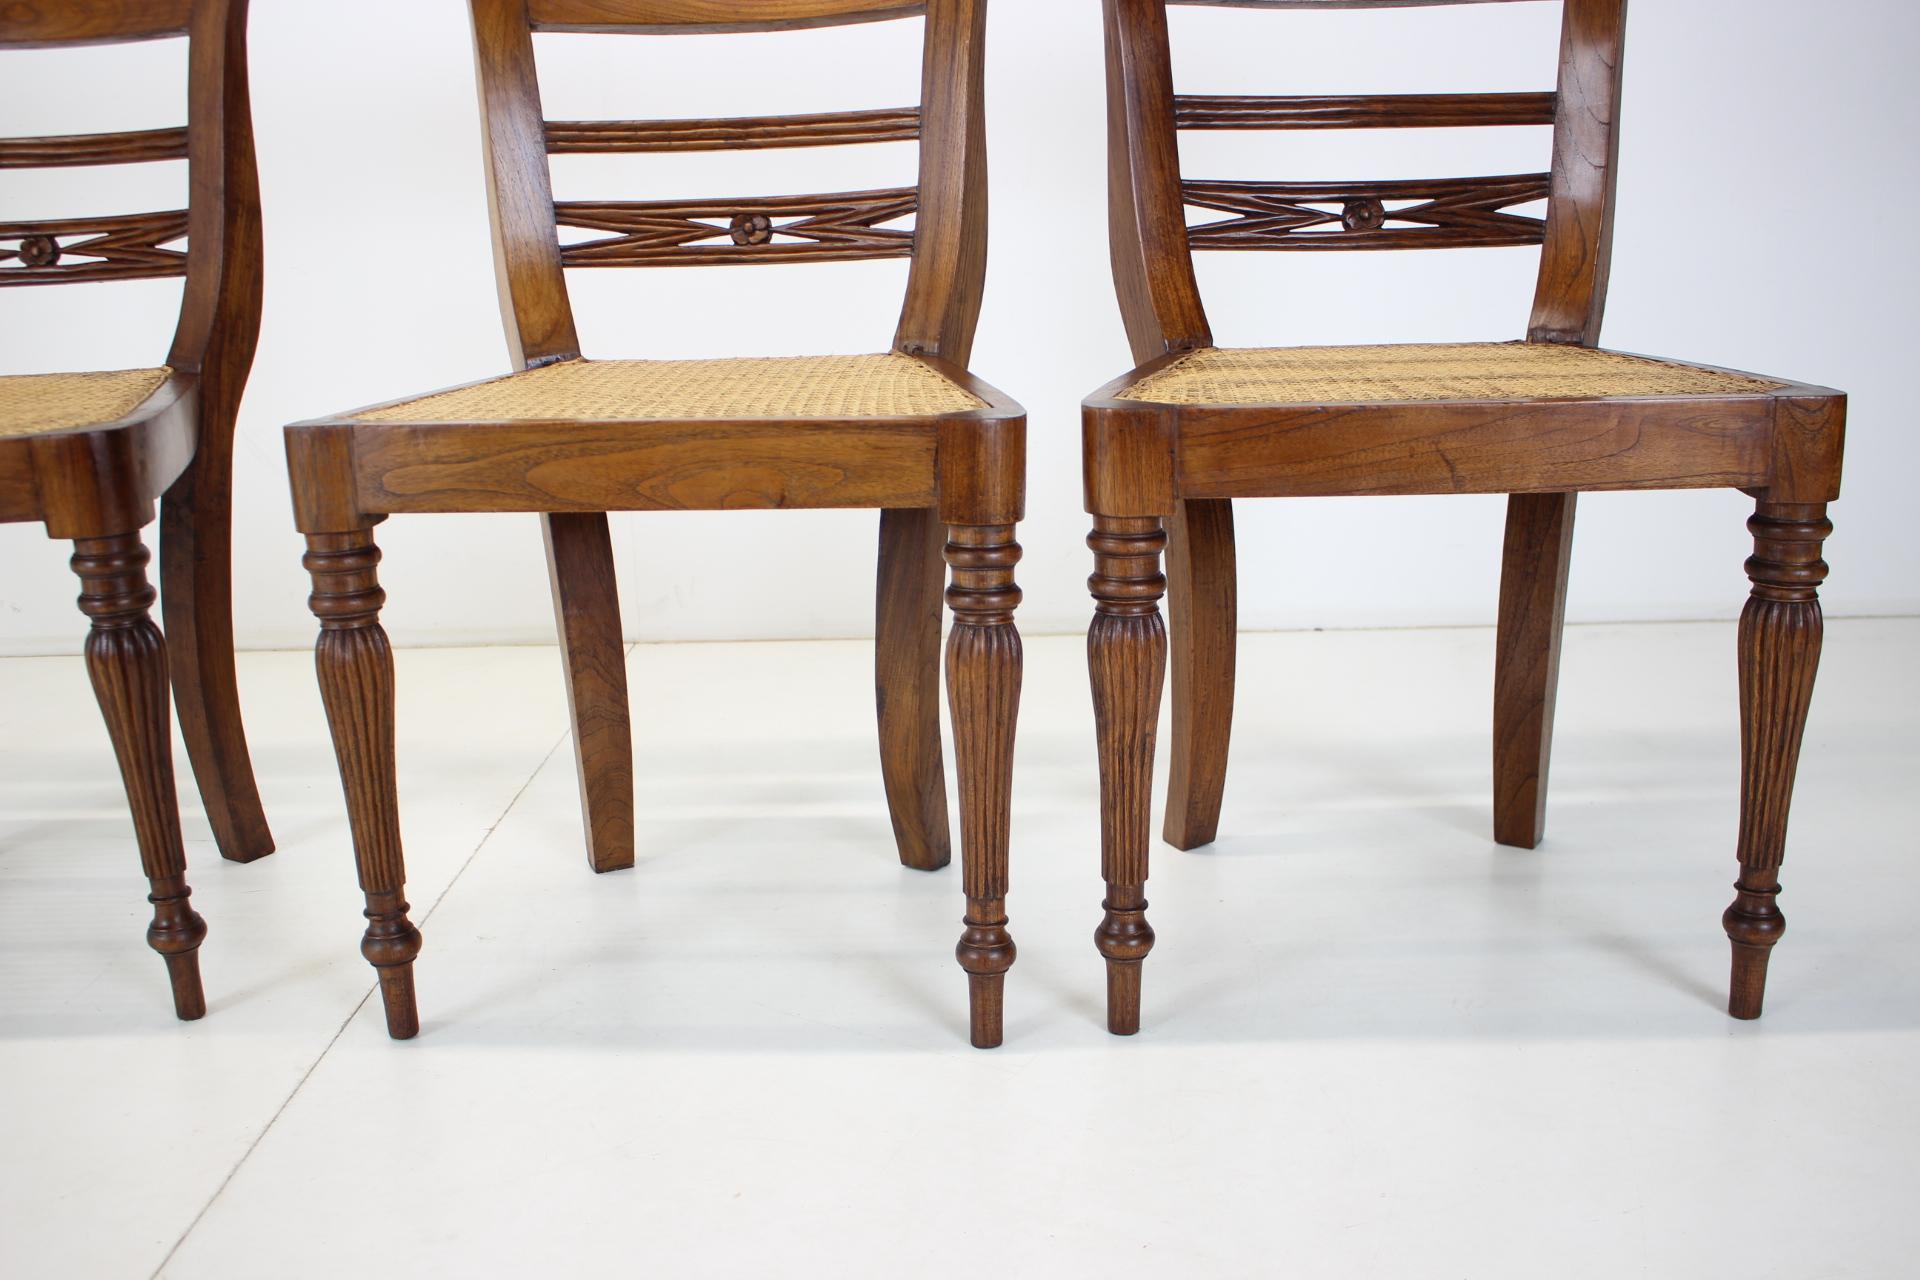 Set of Four Dining Chairs, Made of Solid Wood, 1950s, Czechoslovakia For Sale 8